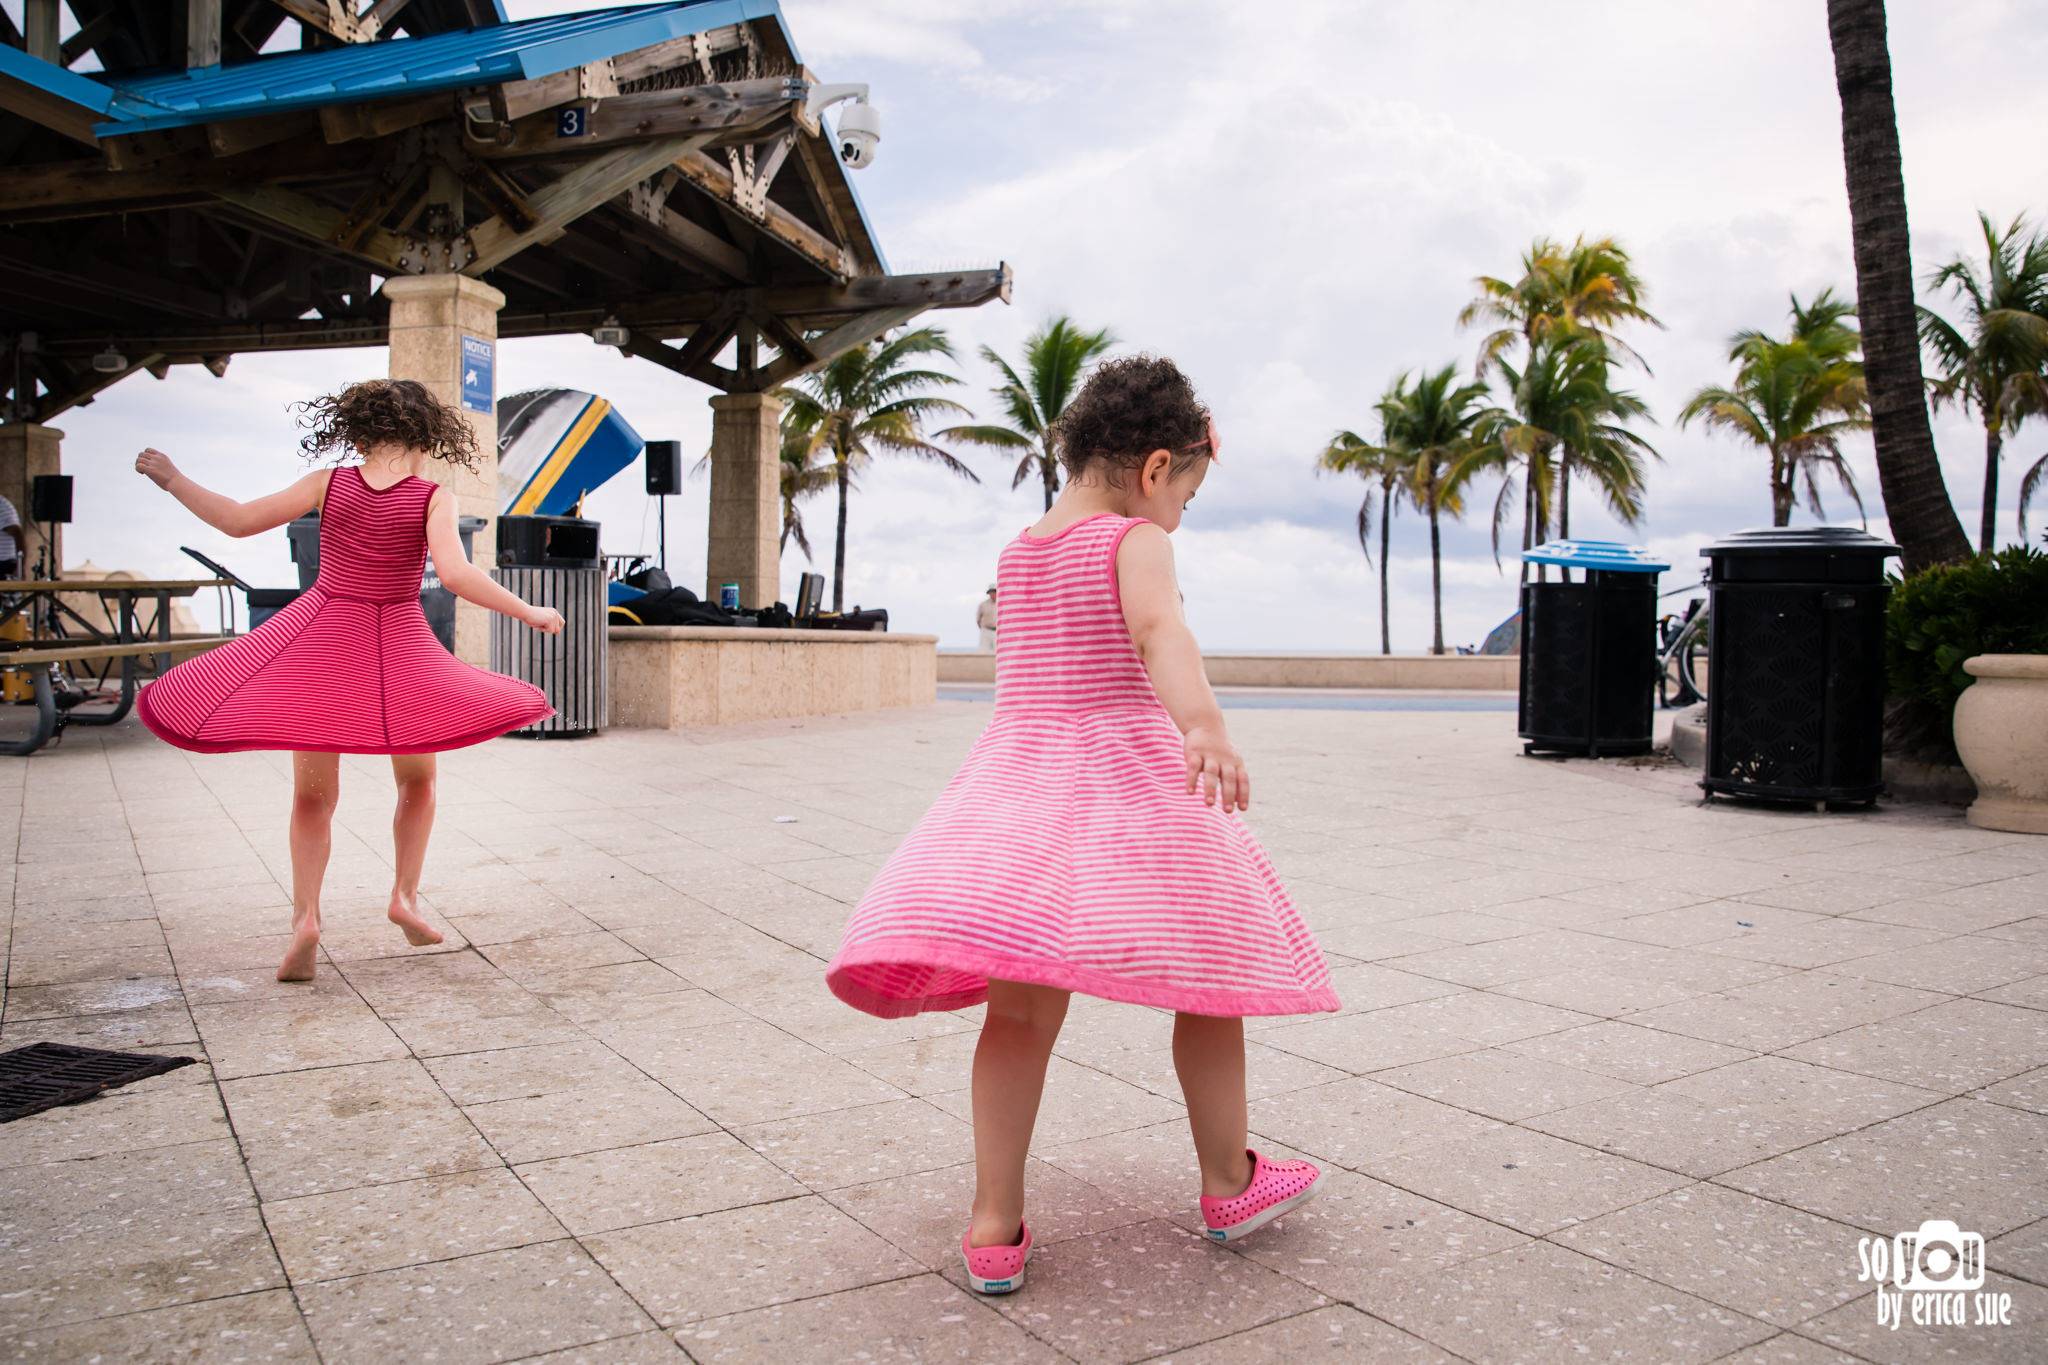 so-you-by-erica-sue-hollywood-beach-lifestyle-family-photographer-session-1852.JPG